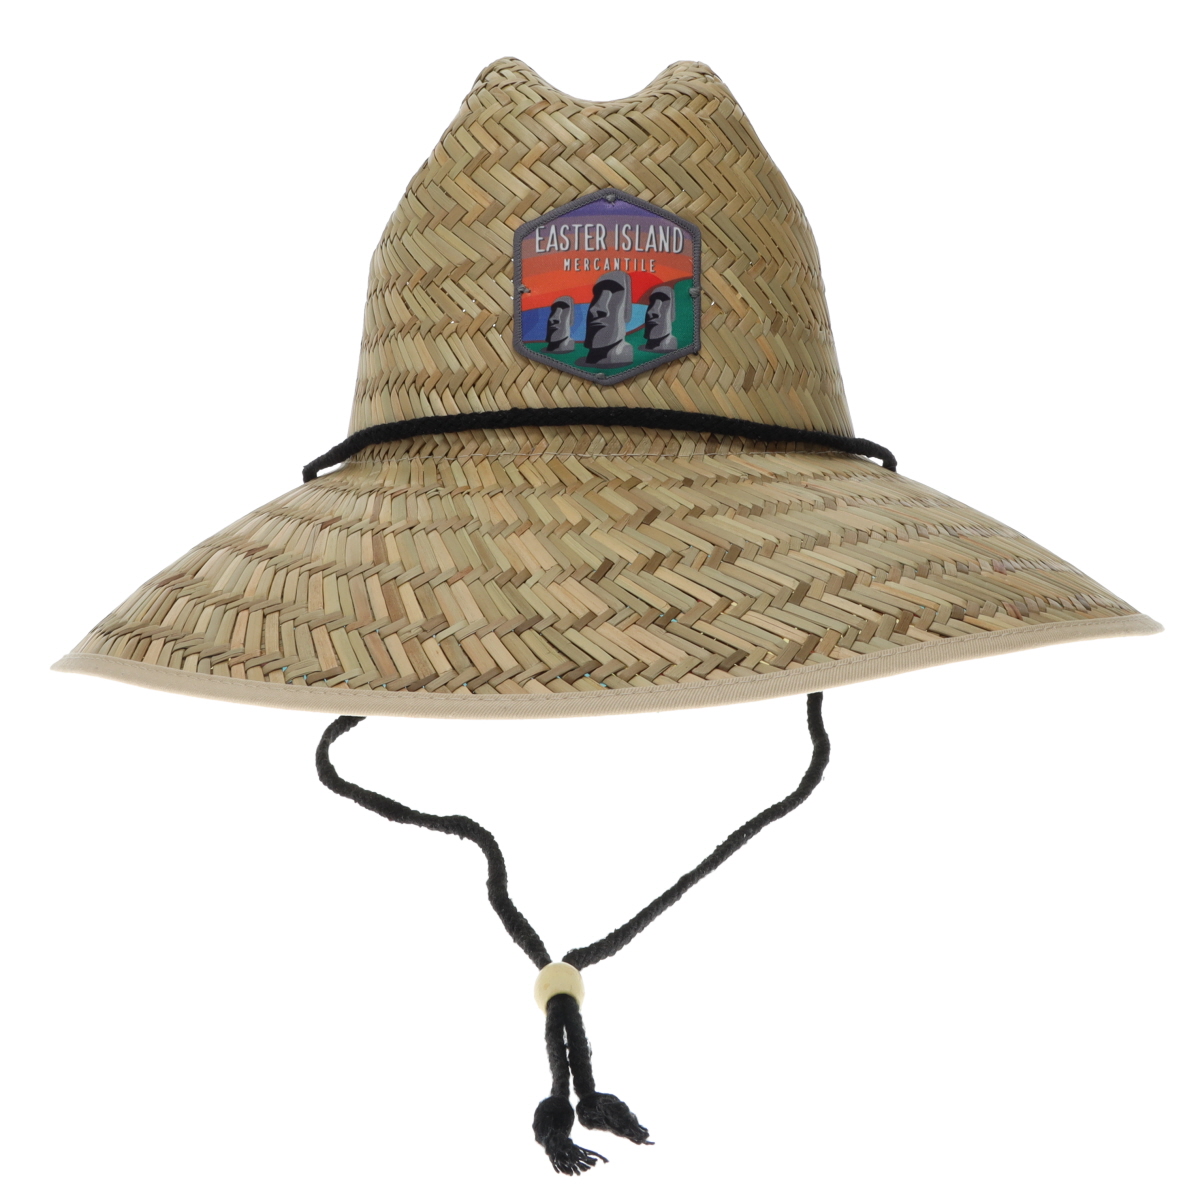 Easter Island Mercantile HBS4BLU Straw Patch Hat with Blue Floral Brim Straw Sun Hat for Men and Women Beach Hat Sunblock